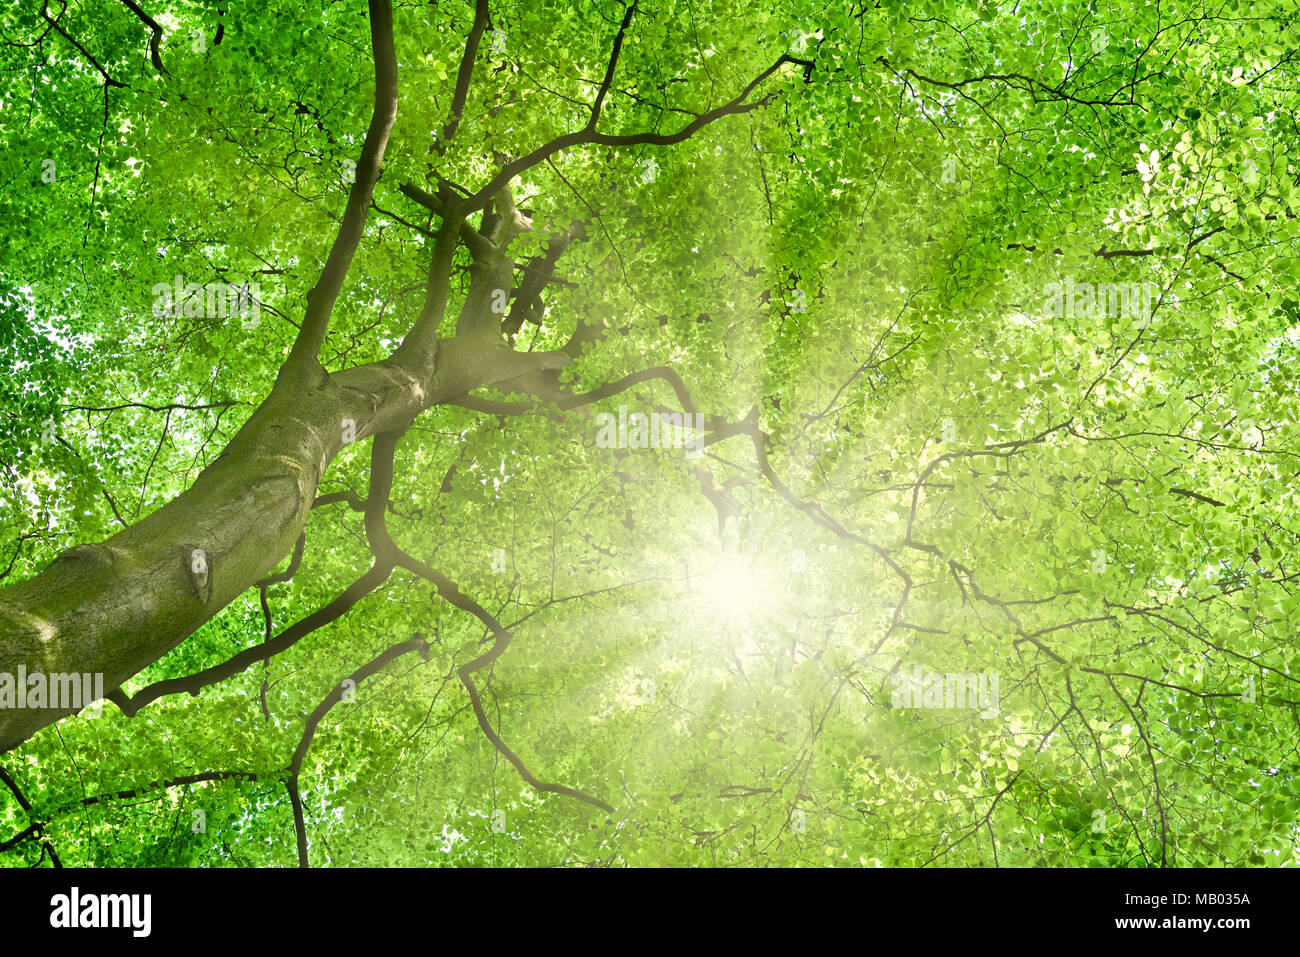 High beech tree with green leaves or summer tree top. Low angle view of an old tree in summer. Stock Photo